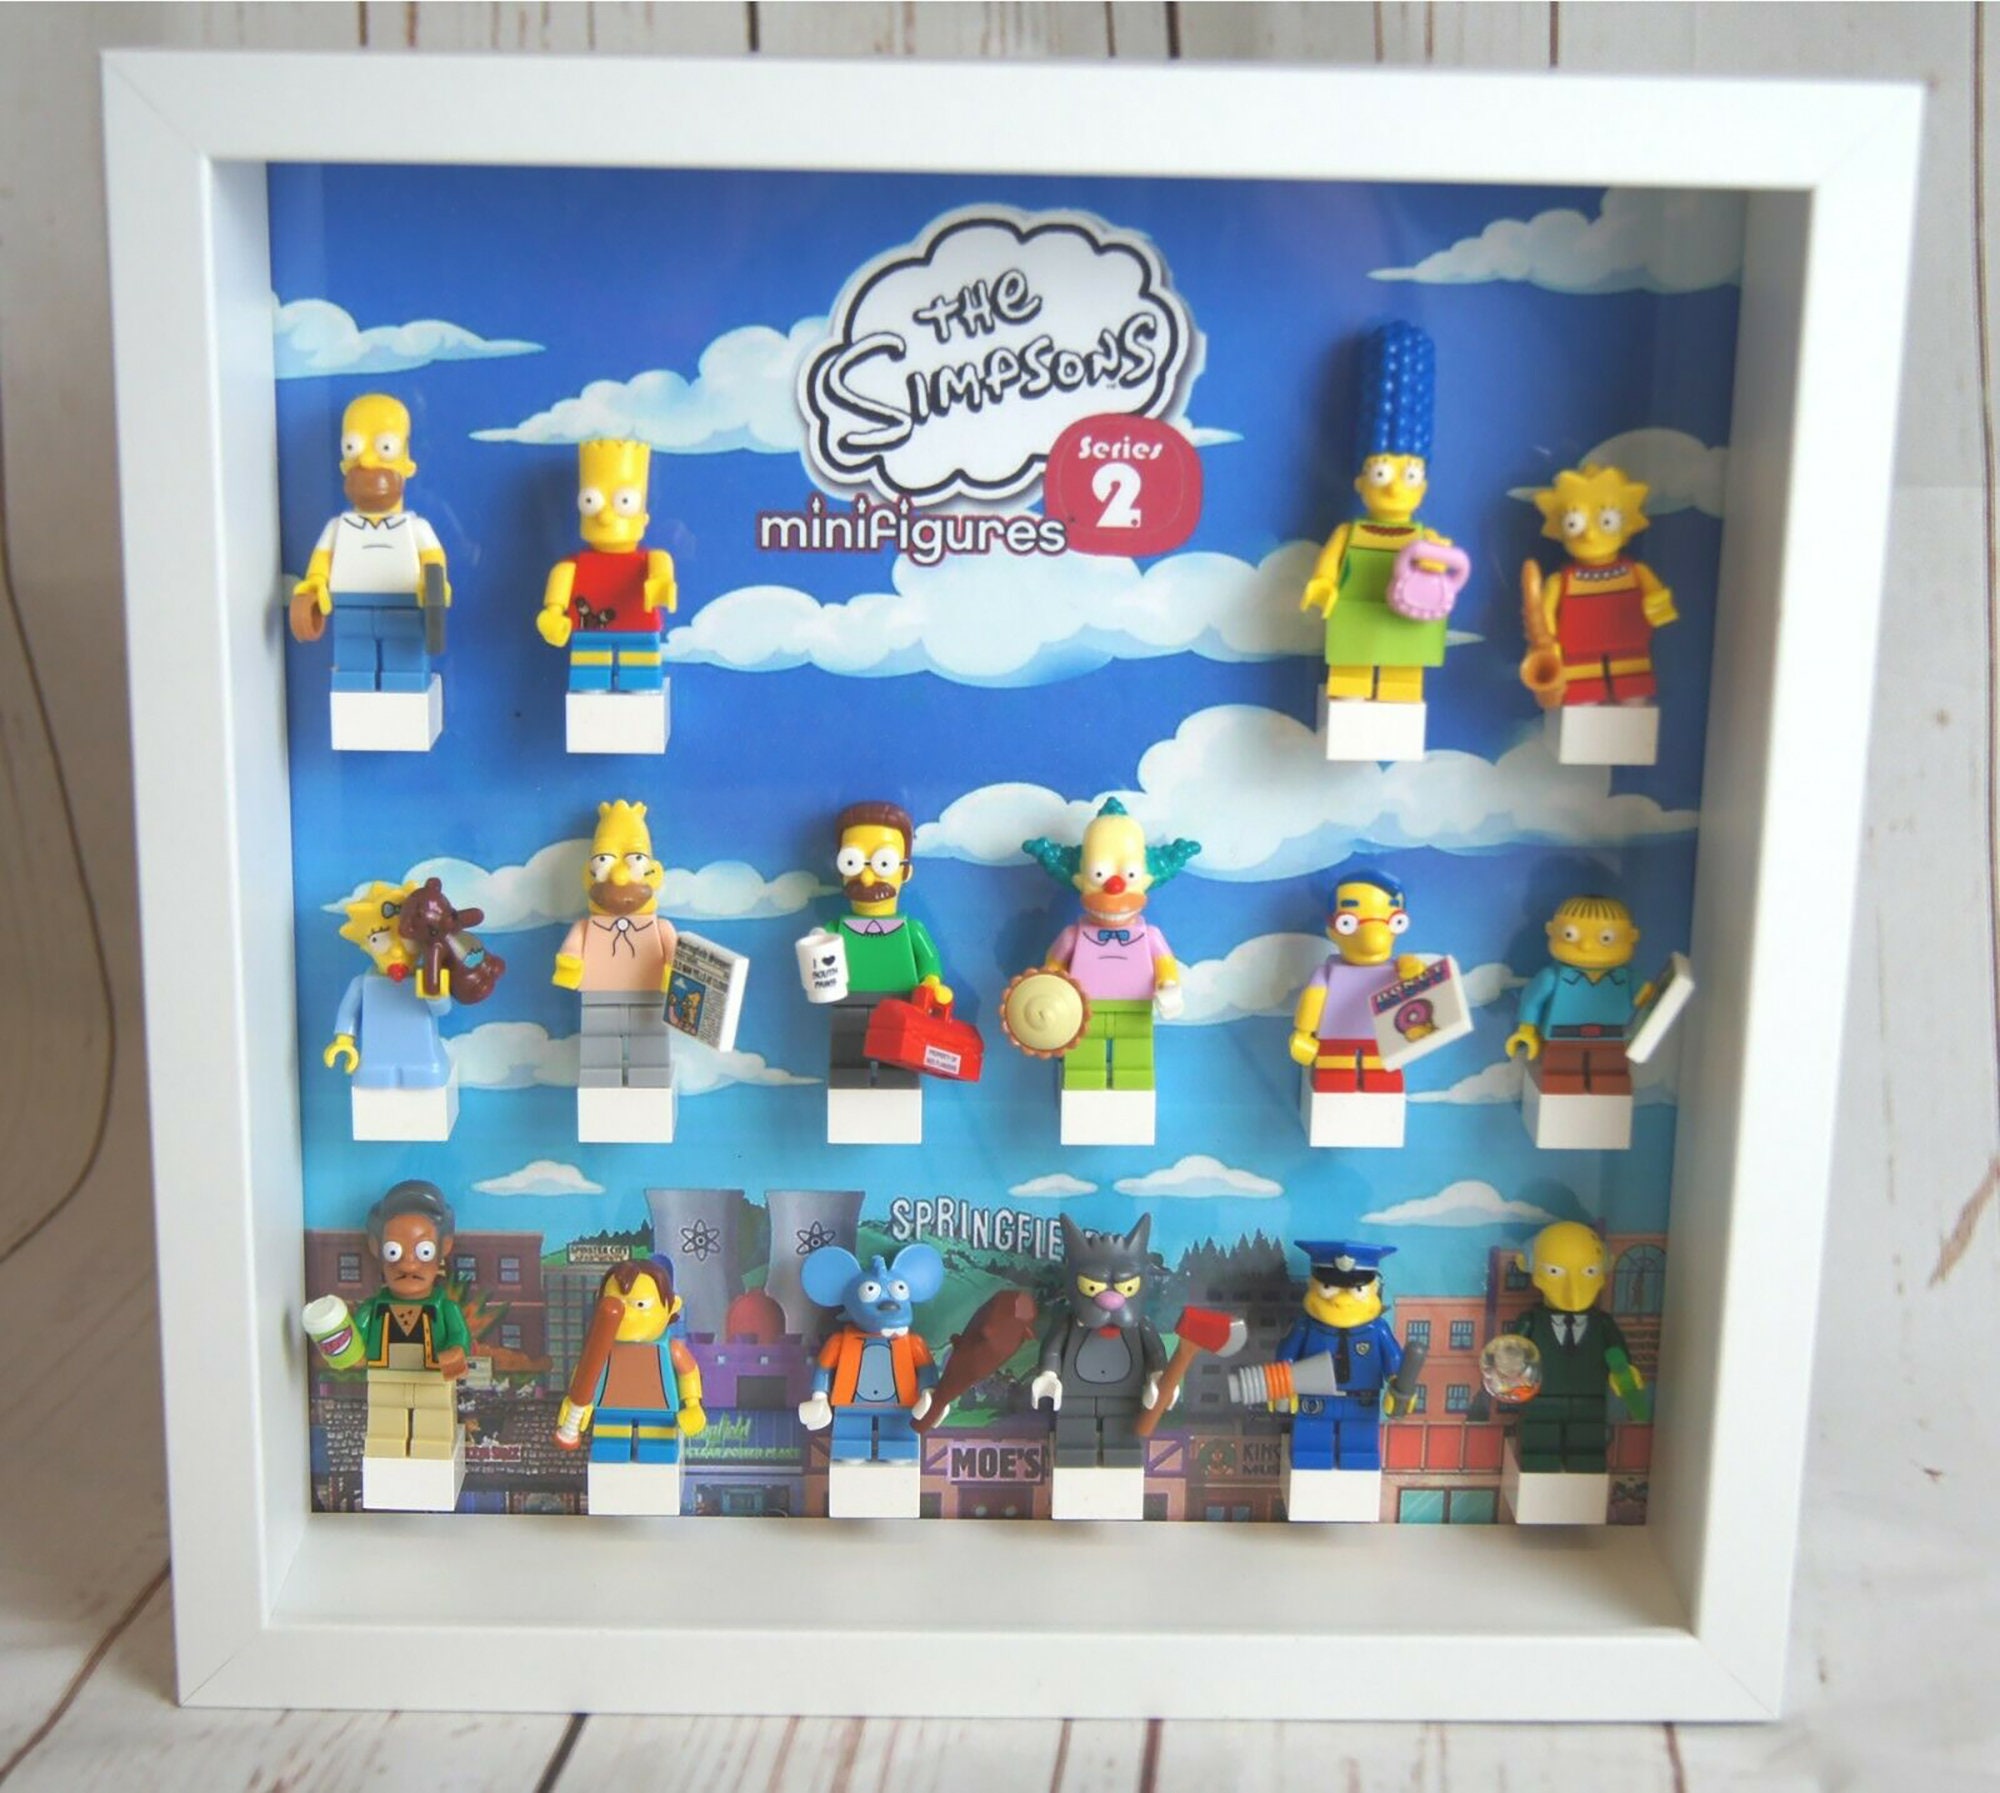 Simpsons Series 1 Acrylic Display Case Frame for LEGO Minifigures 